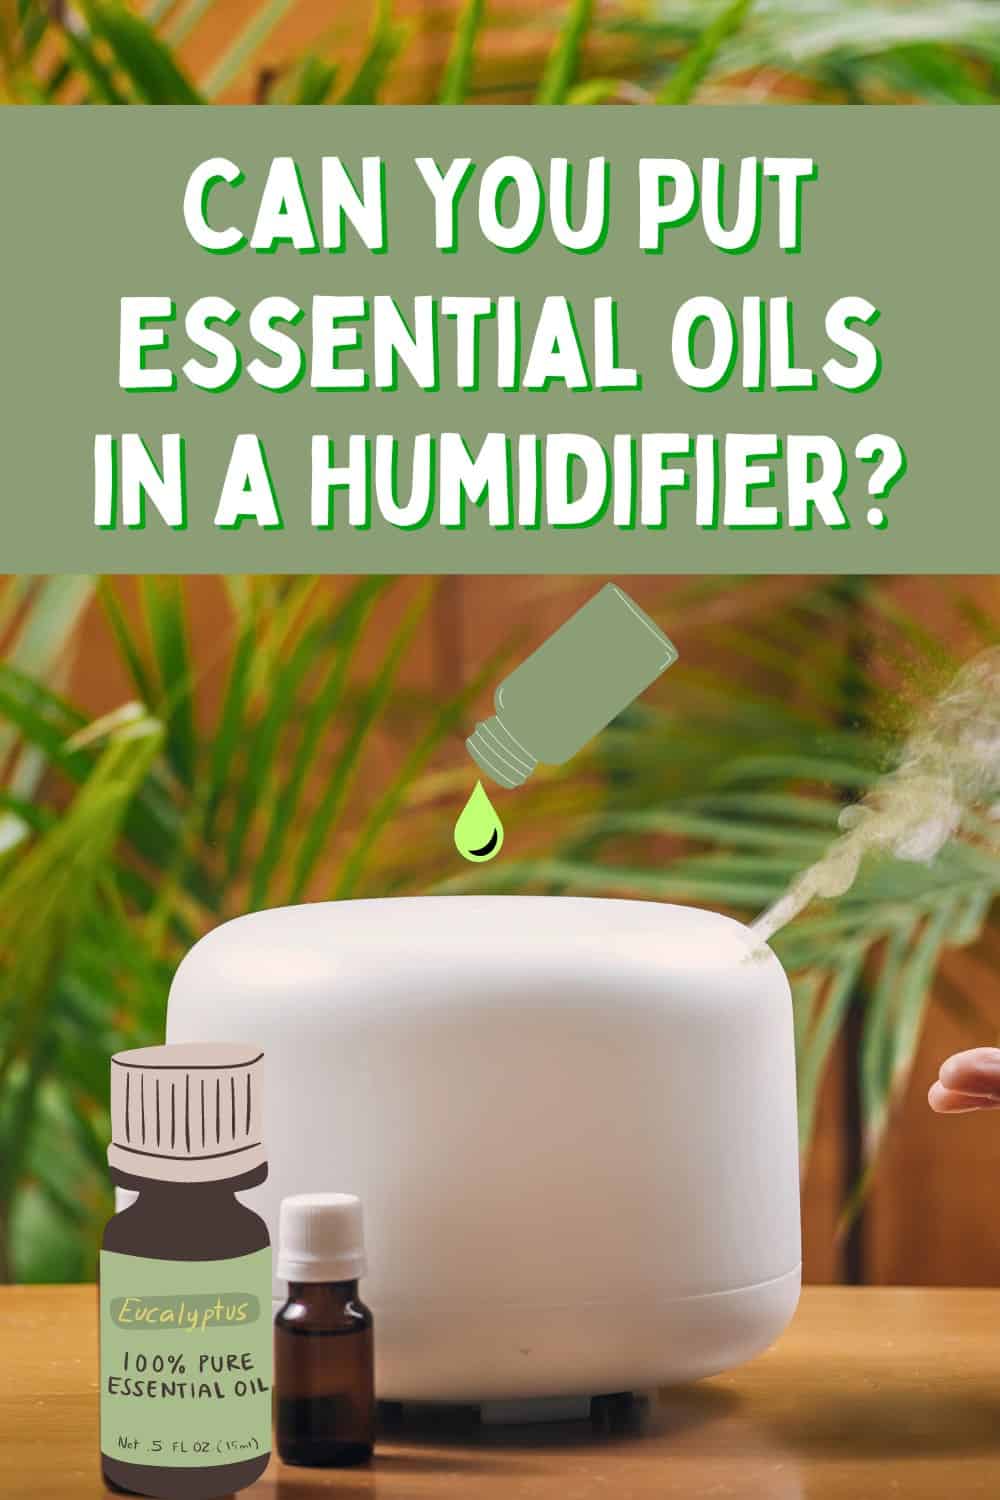 Putting essential oils in a humidifier is not a good idea